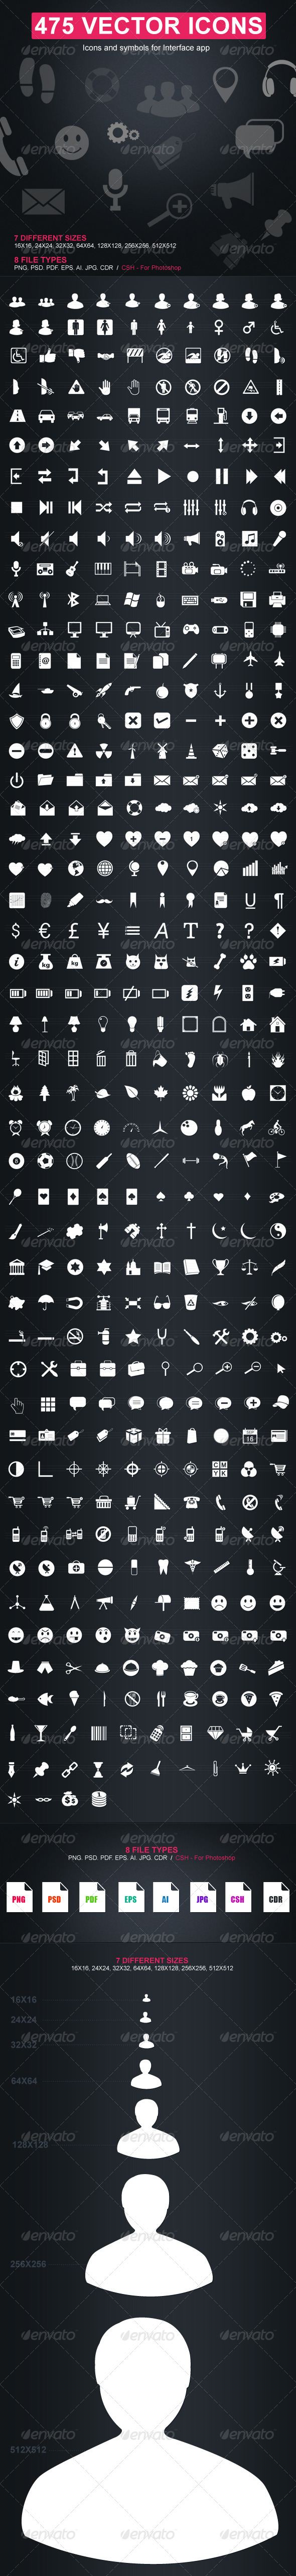 475 Vector Icons